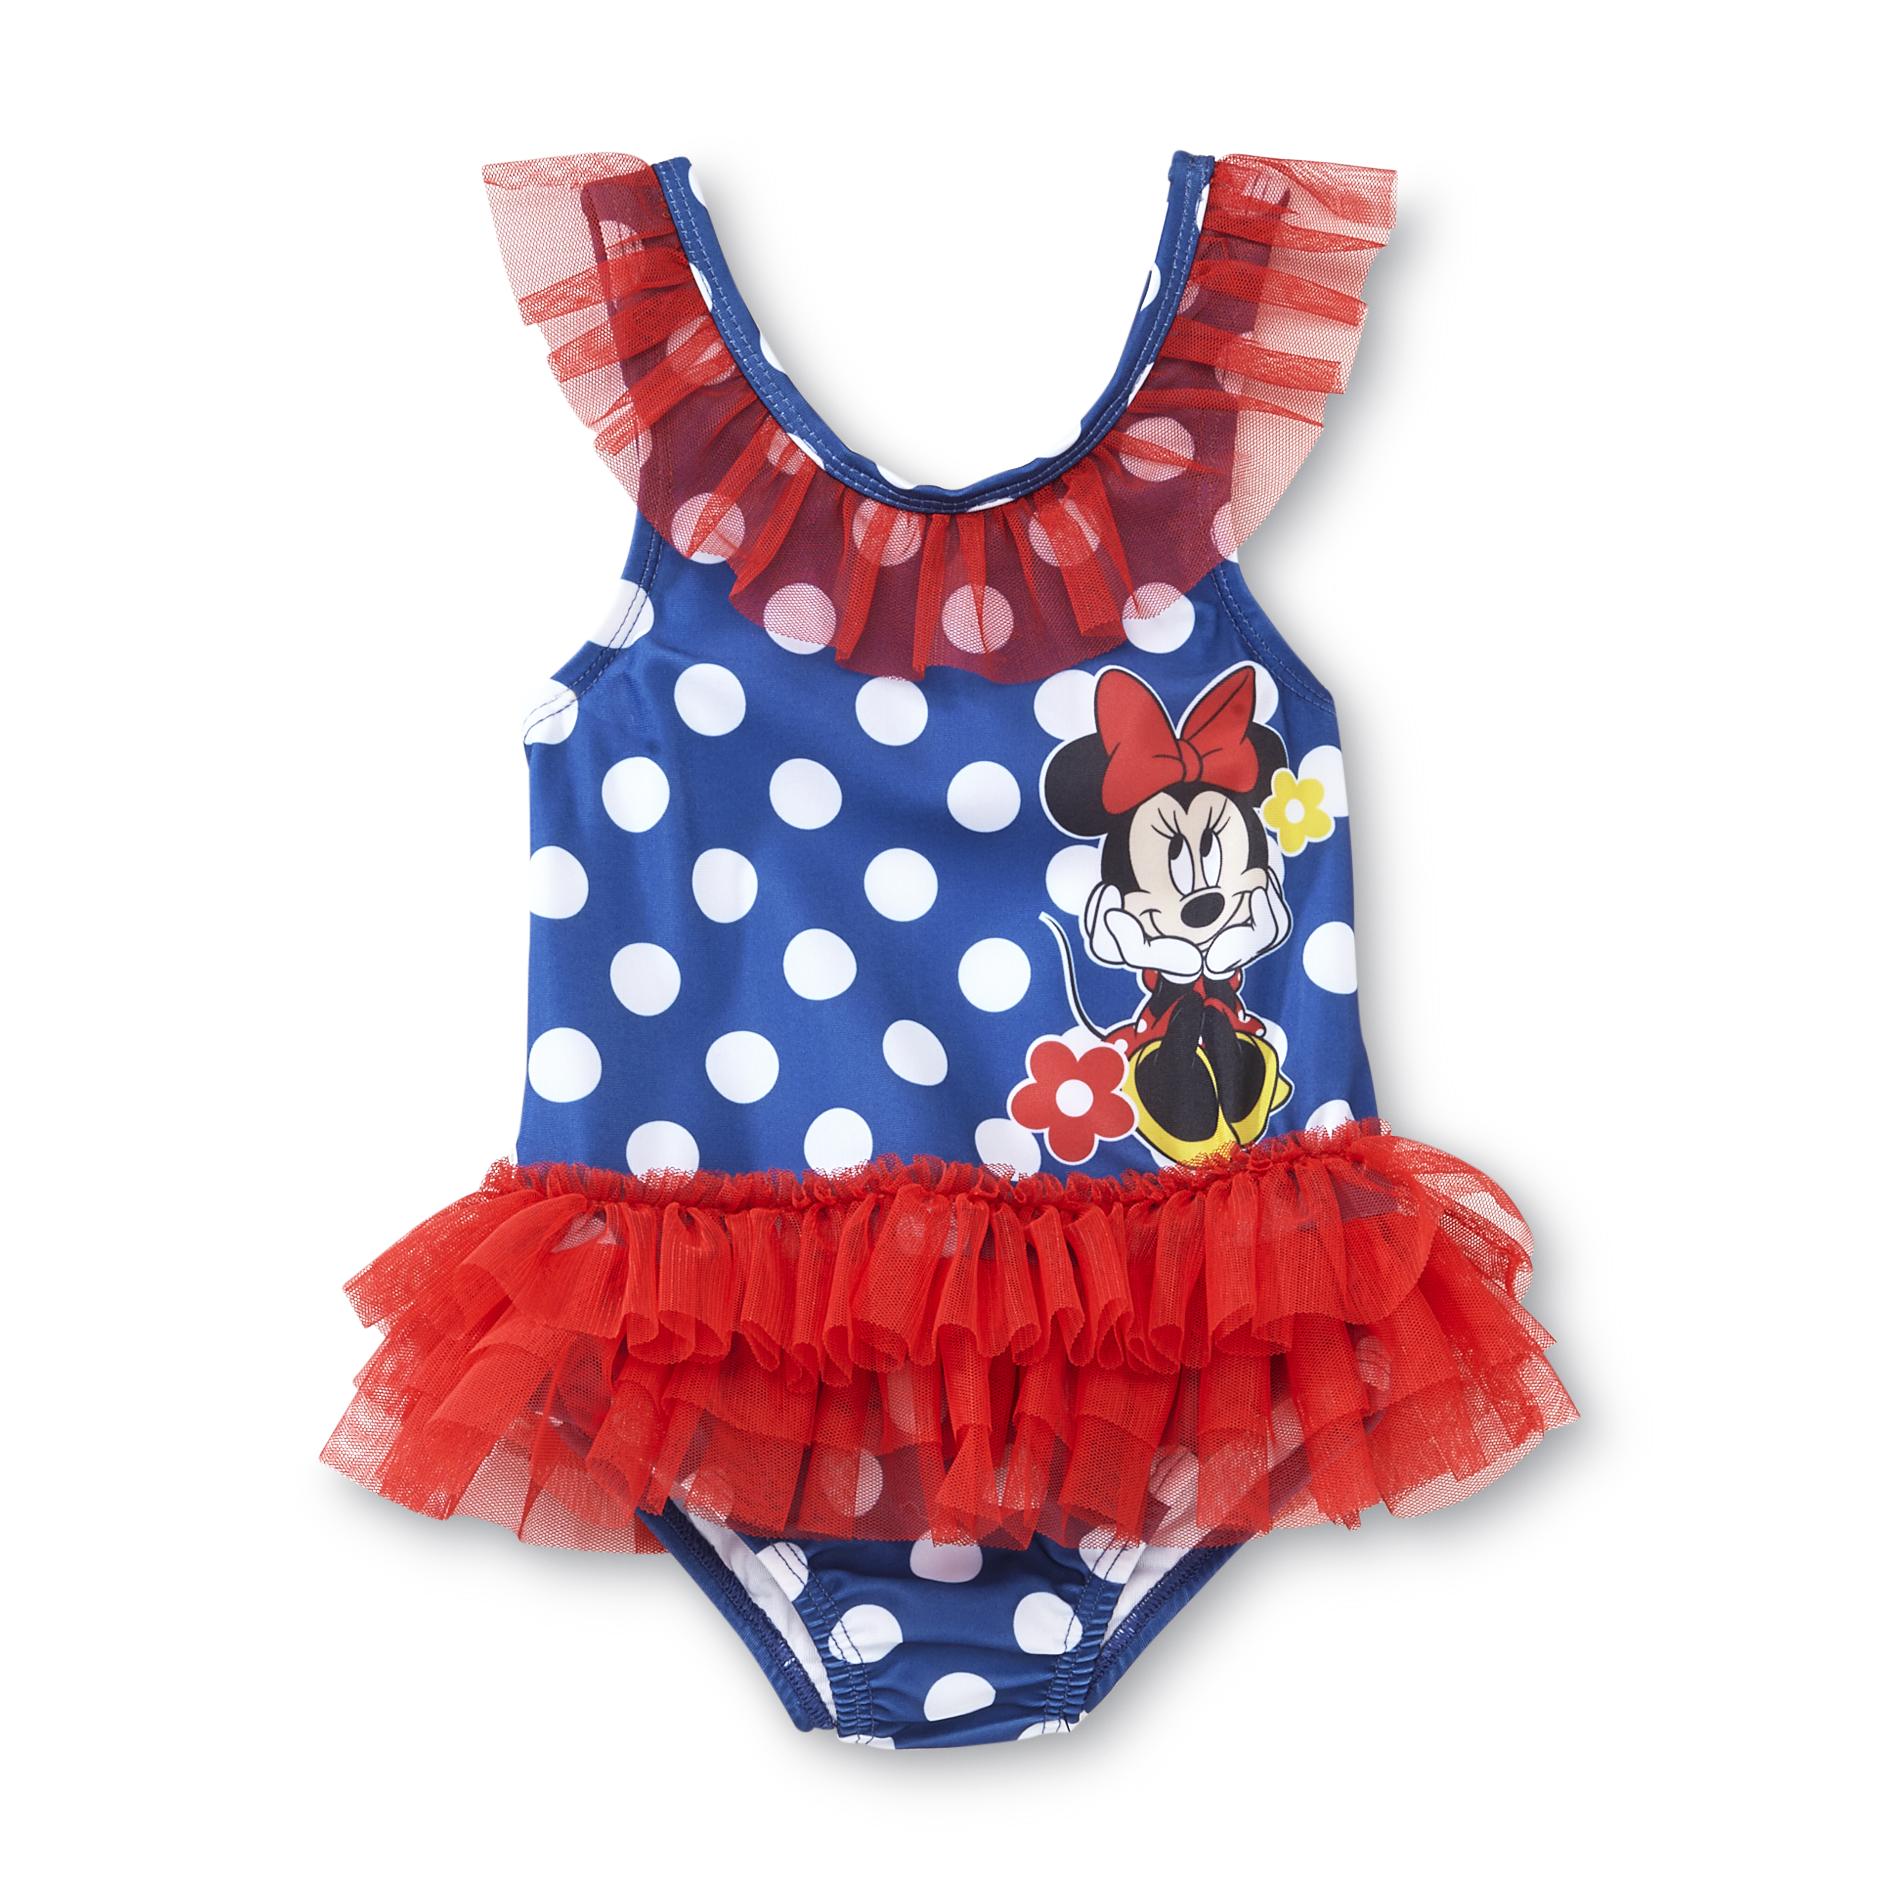 Disney Minnie Mouse Infant & Toddler Girl's Swimsuit - Polka Dots